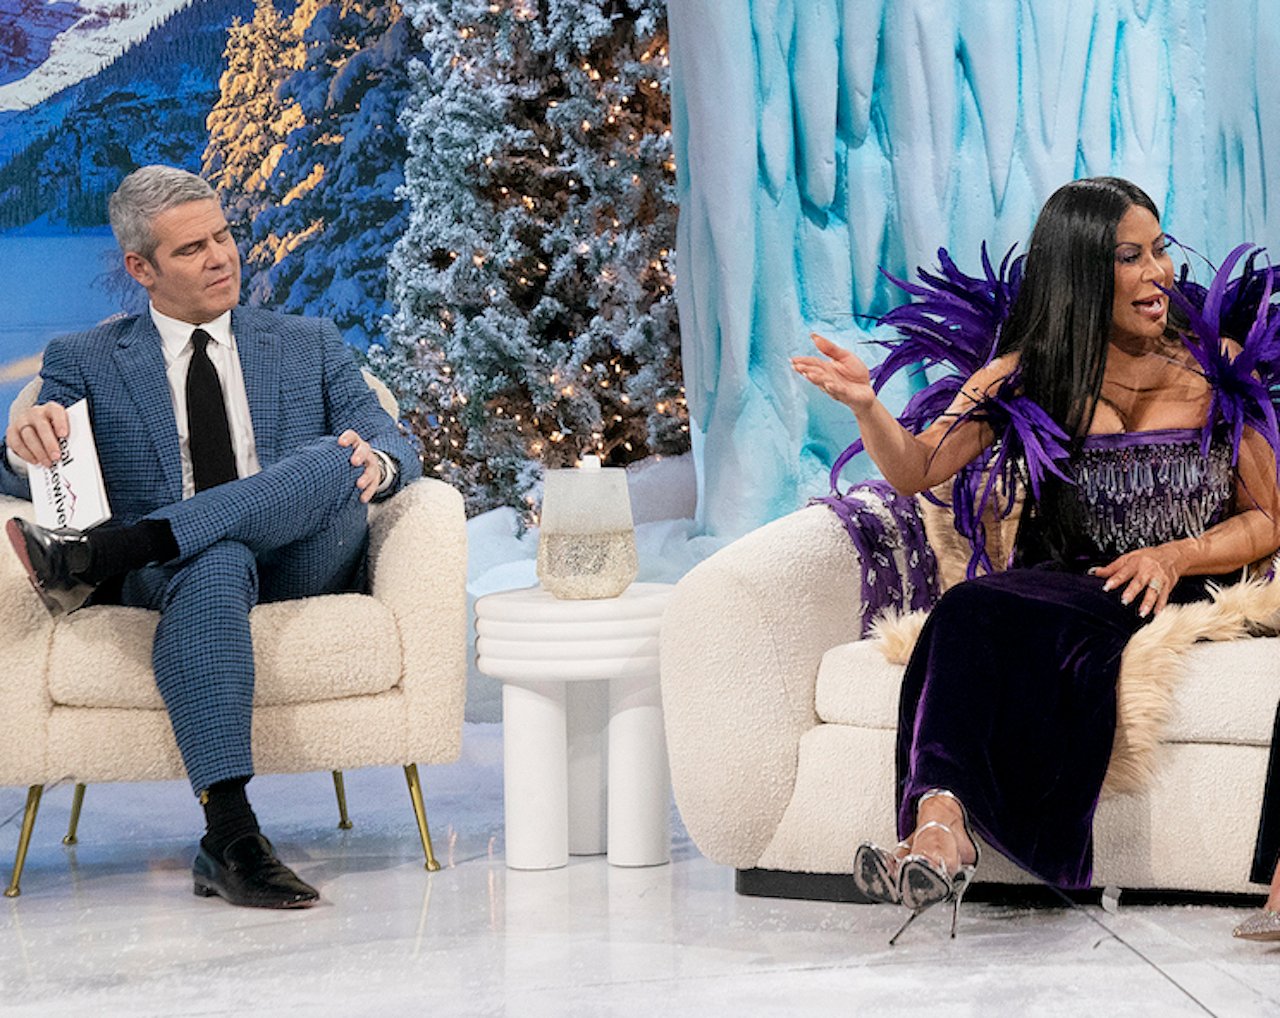 Andy Cohen and Jen Shah talk during 'RHOSLC' reunion; 'The View' co-hosts disagree with Cohen's punishment of Shah in comparison to Teresa Giudice